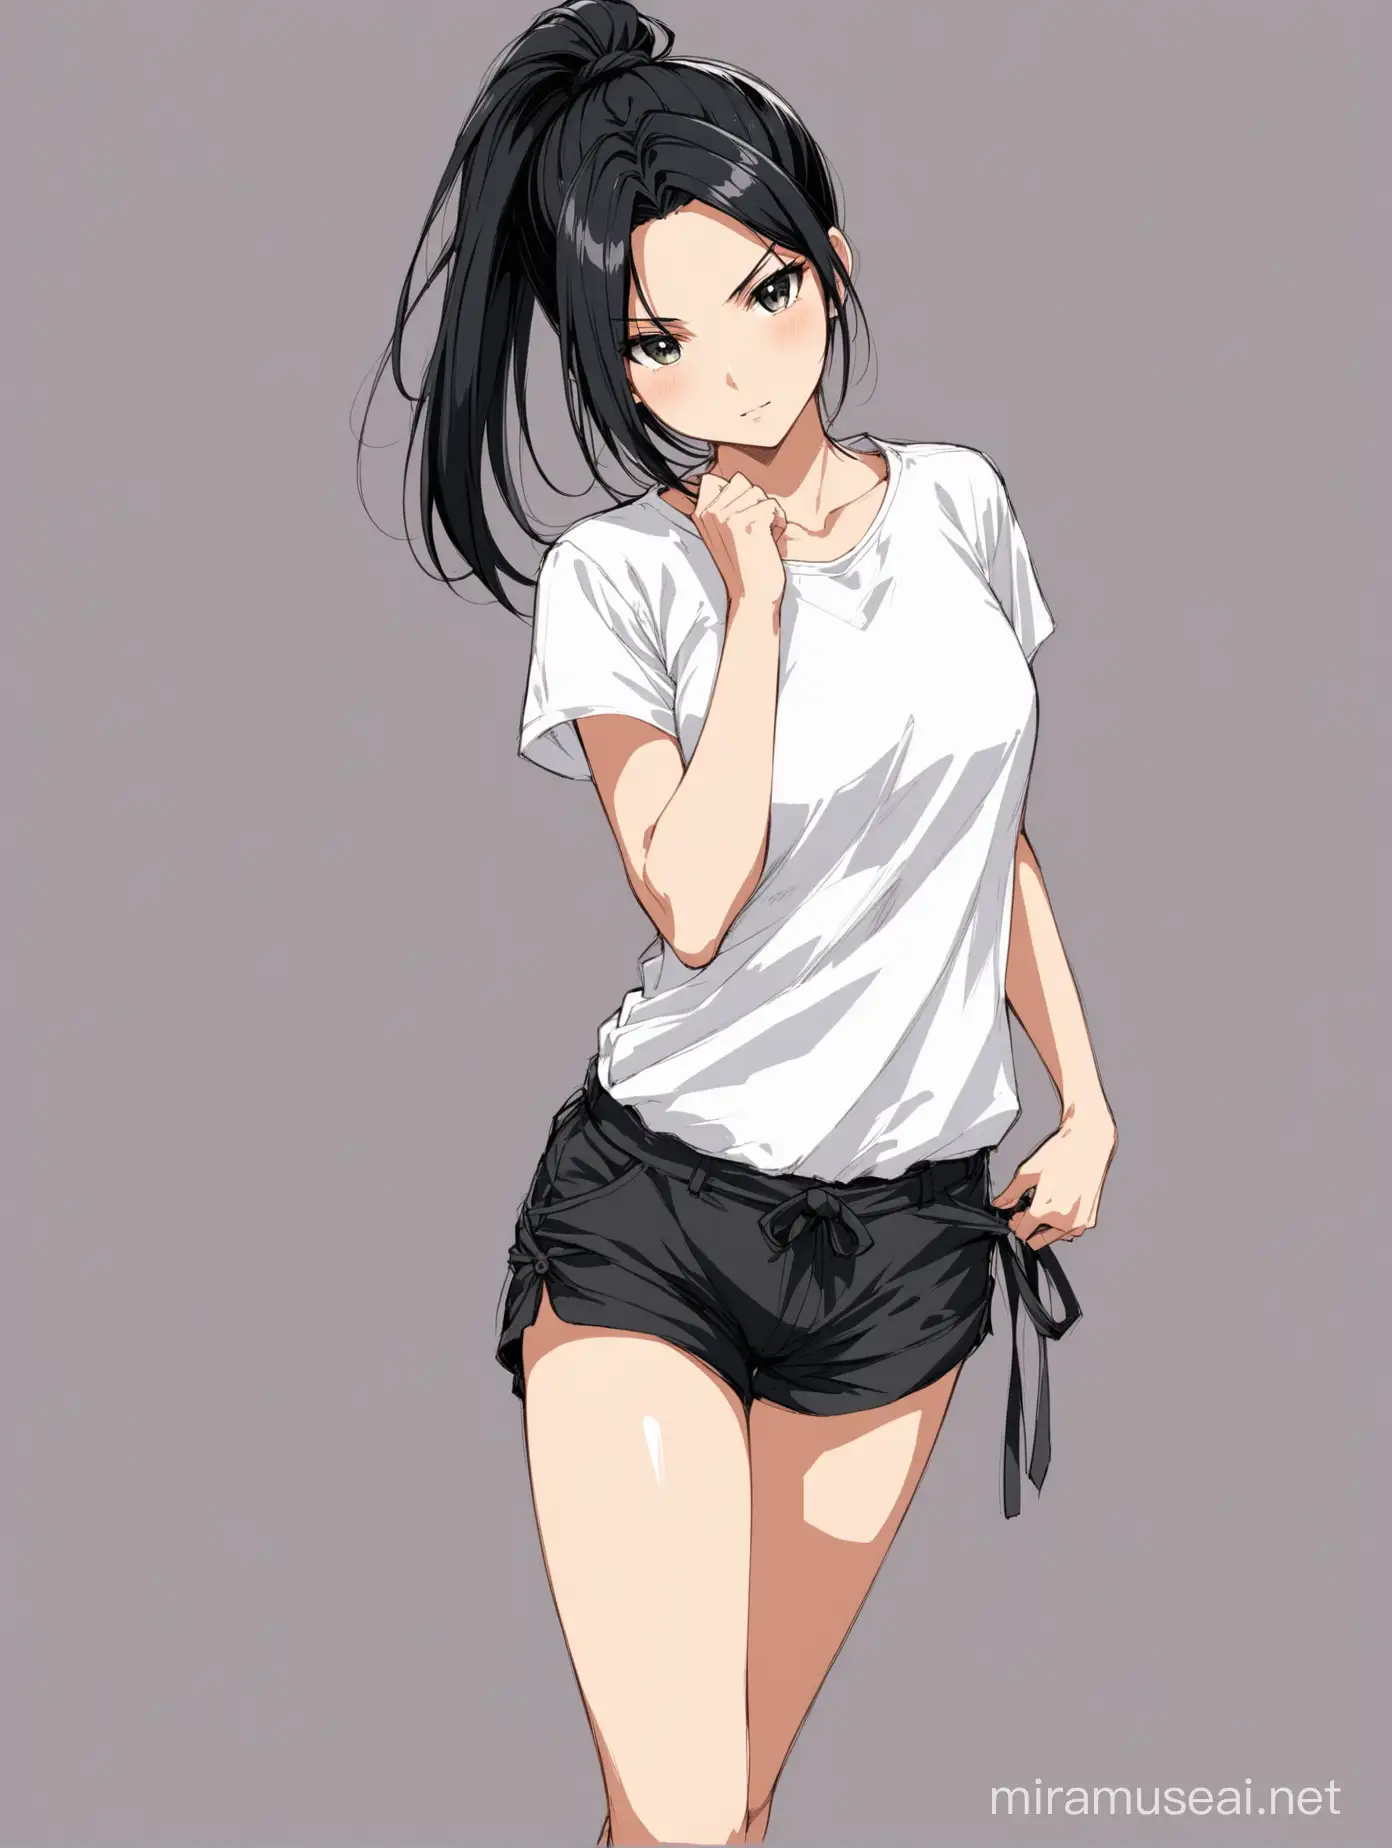 Animestyle Woman in Ponytail with Shorts and White Shirt